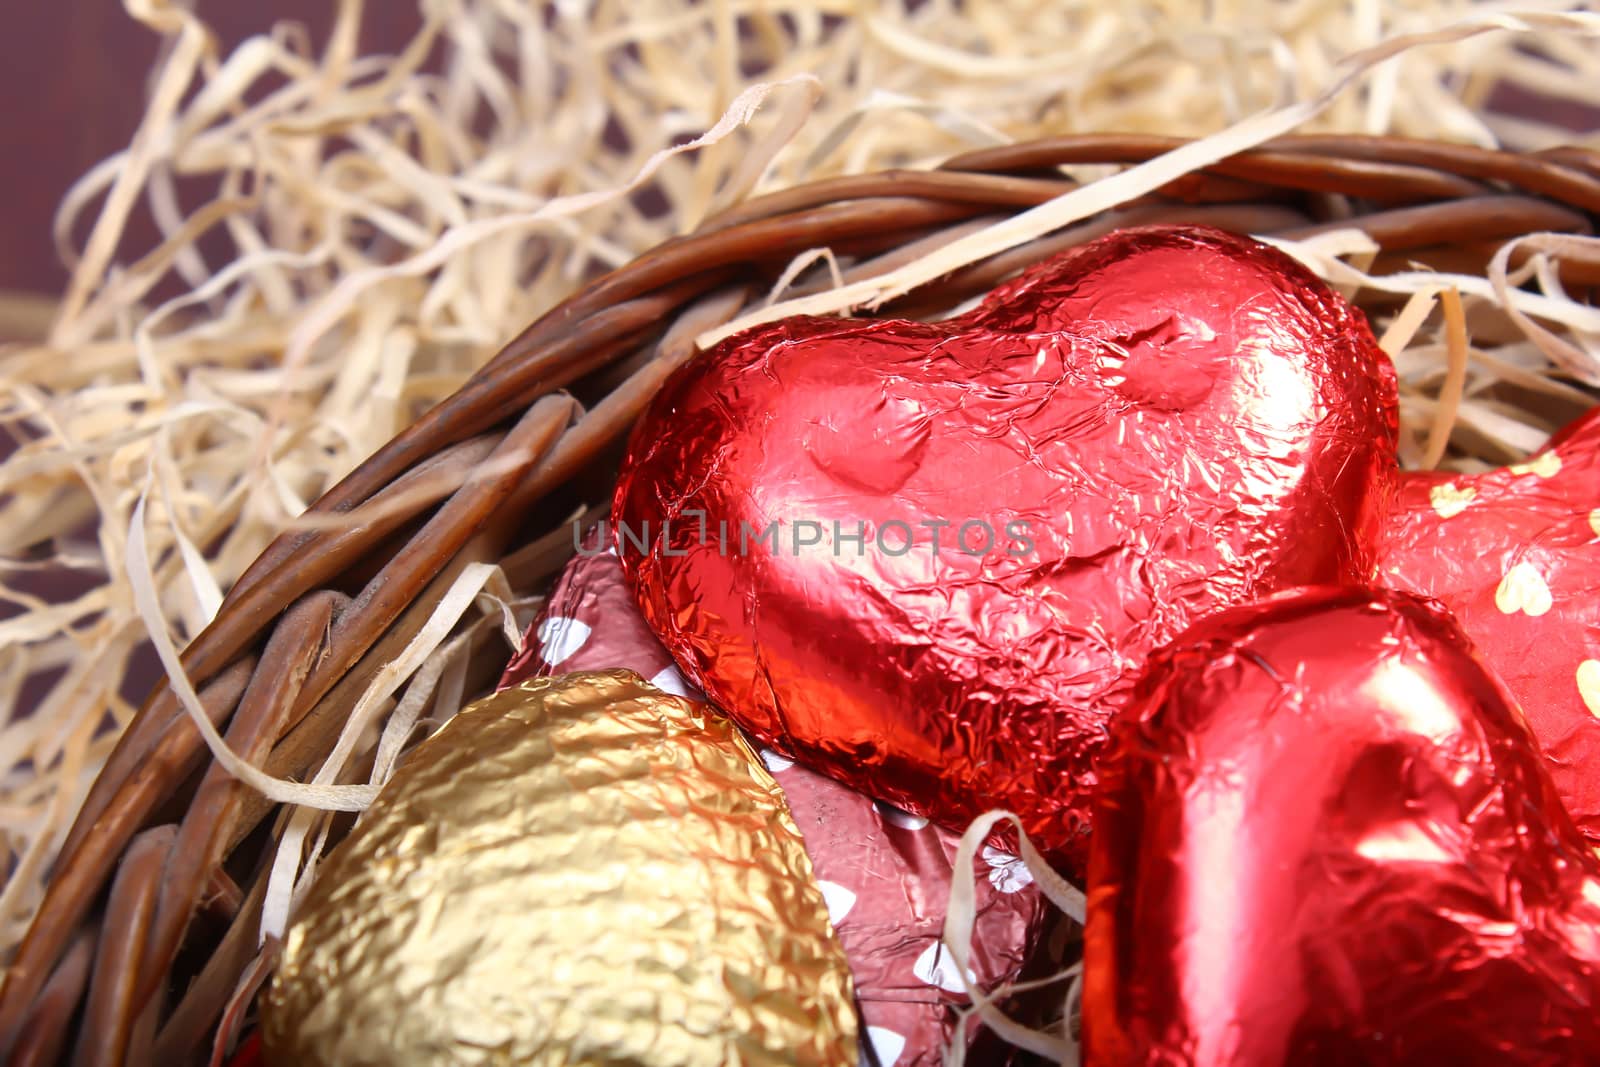 packed home made chocolates in basket